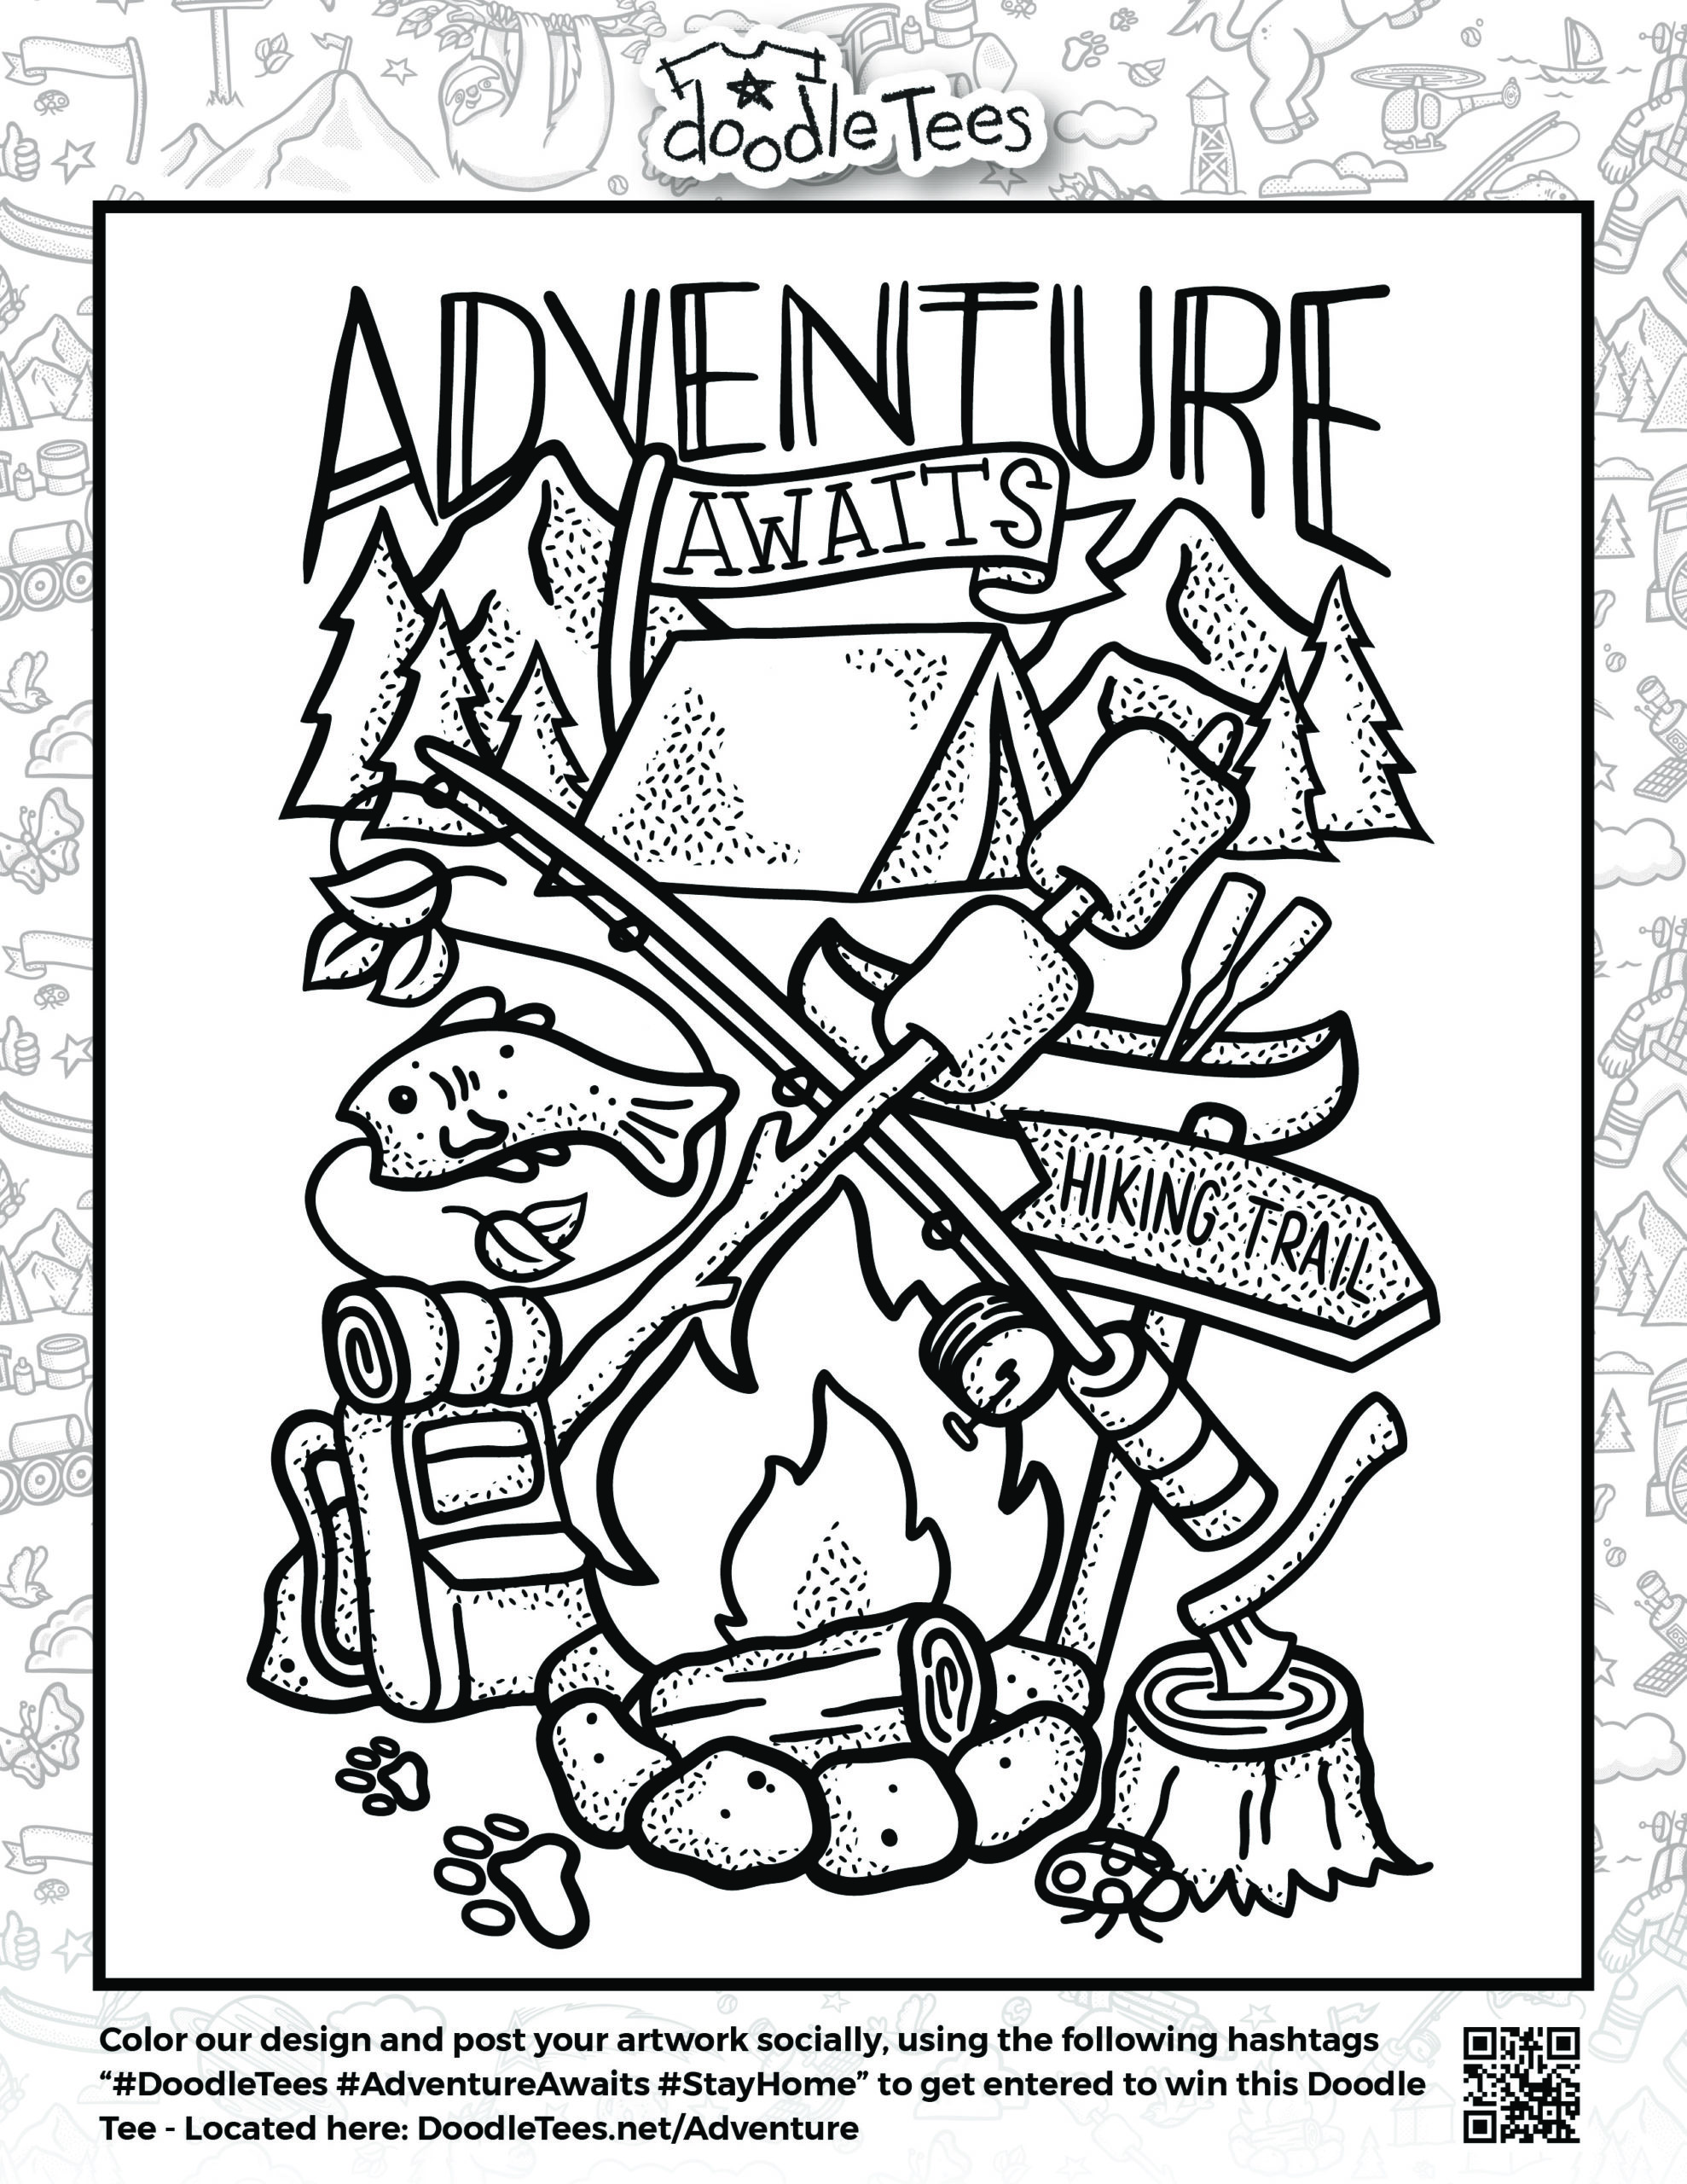 "Doodle Tees 'Adventure Awaits' camping, bonfire and forest design to download and print at home"